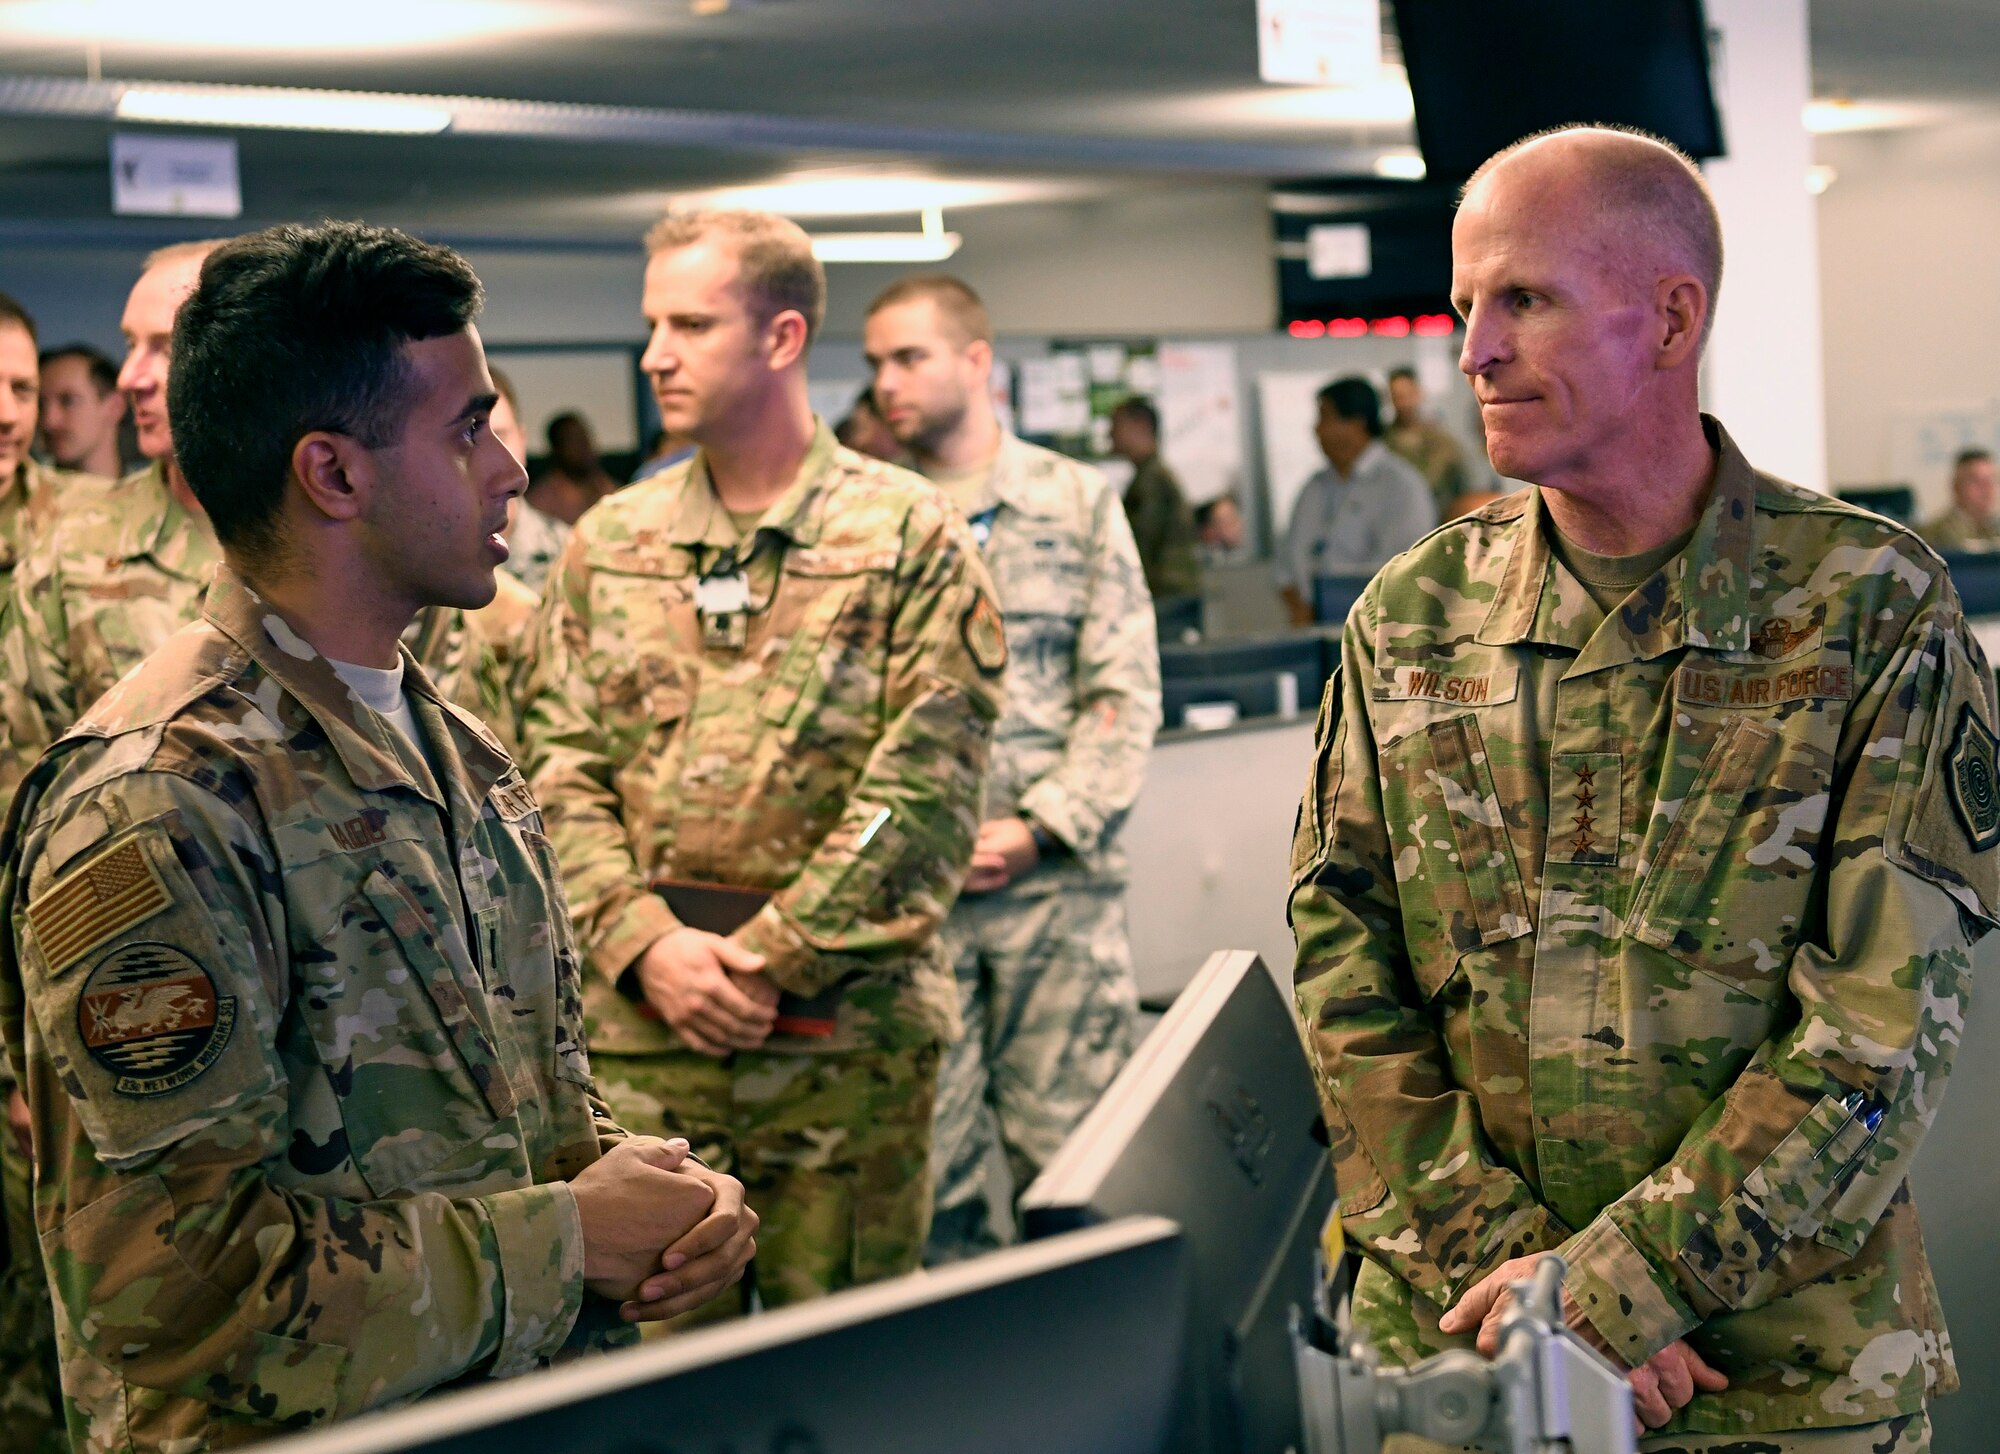 First Lt. Partha Naidu, 33rd Network Warfare Squadron officer in charge of innovation, briefs Gen. Stephen Wilson, Vice Chief of Staff of the Air Force, on the 12N12 initiative at Joint Base San Antonio-Lackland, Aug. 28, 2019. The initiative aims to modernize the Air Force Cyberspace Security and Defense mission area to a state-of-the-art system built on simplicity, interoperability, automation and agility. (U.S. Air Force photo by Tech. Sgt. R.J. Biermann)